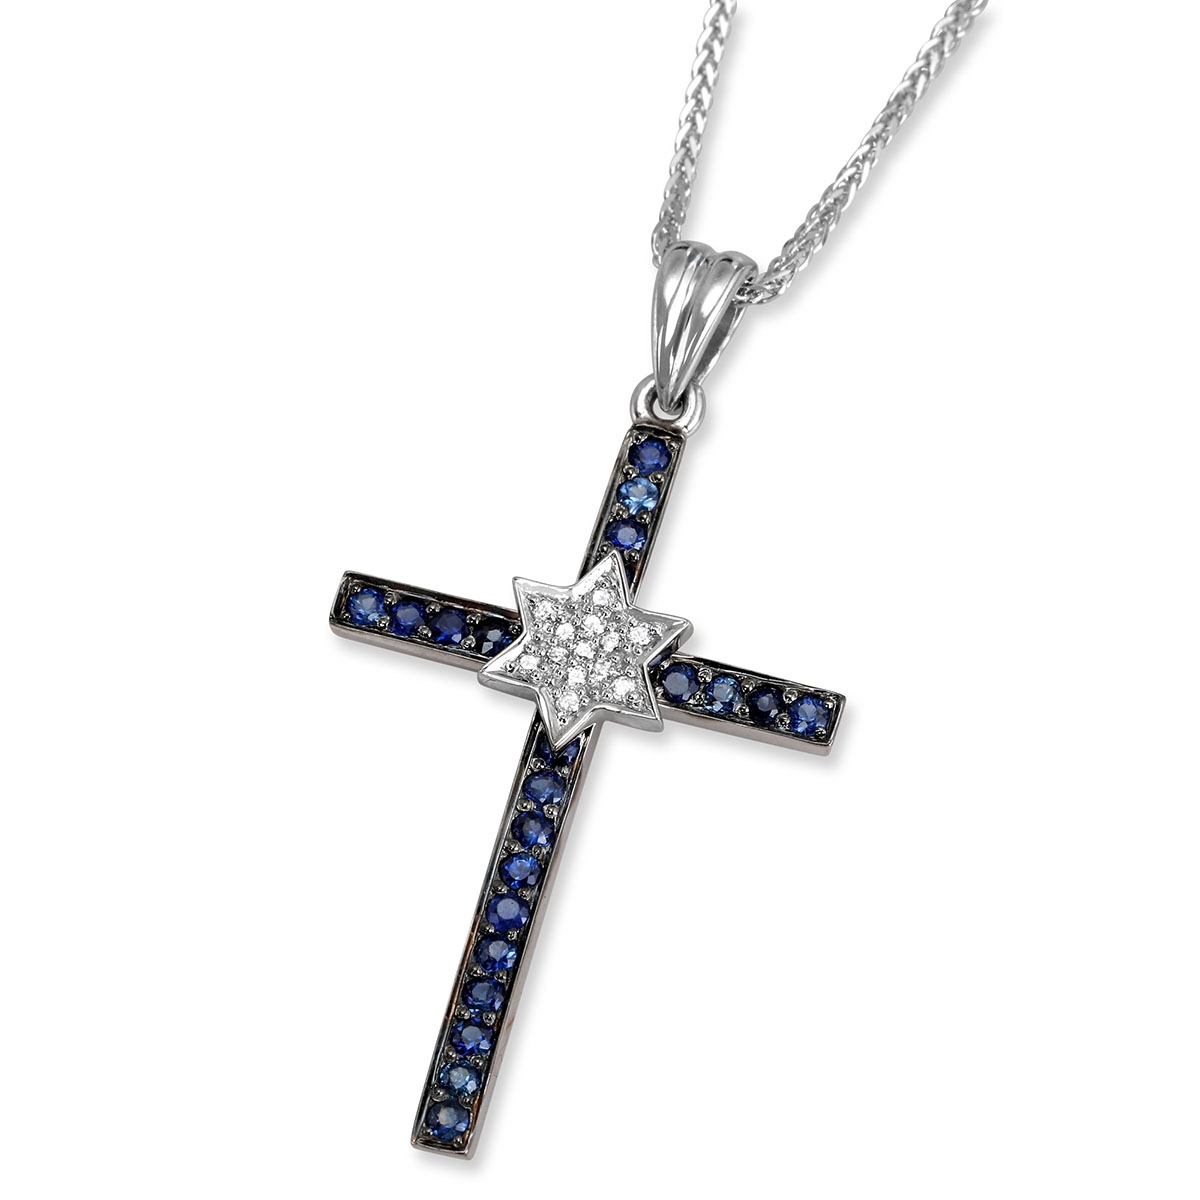 Anbinder 14K White and Black Gold Slim Latin Cross Pendant with Diamond Accented Star of David and Sapphires - 1